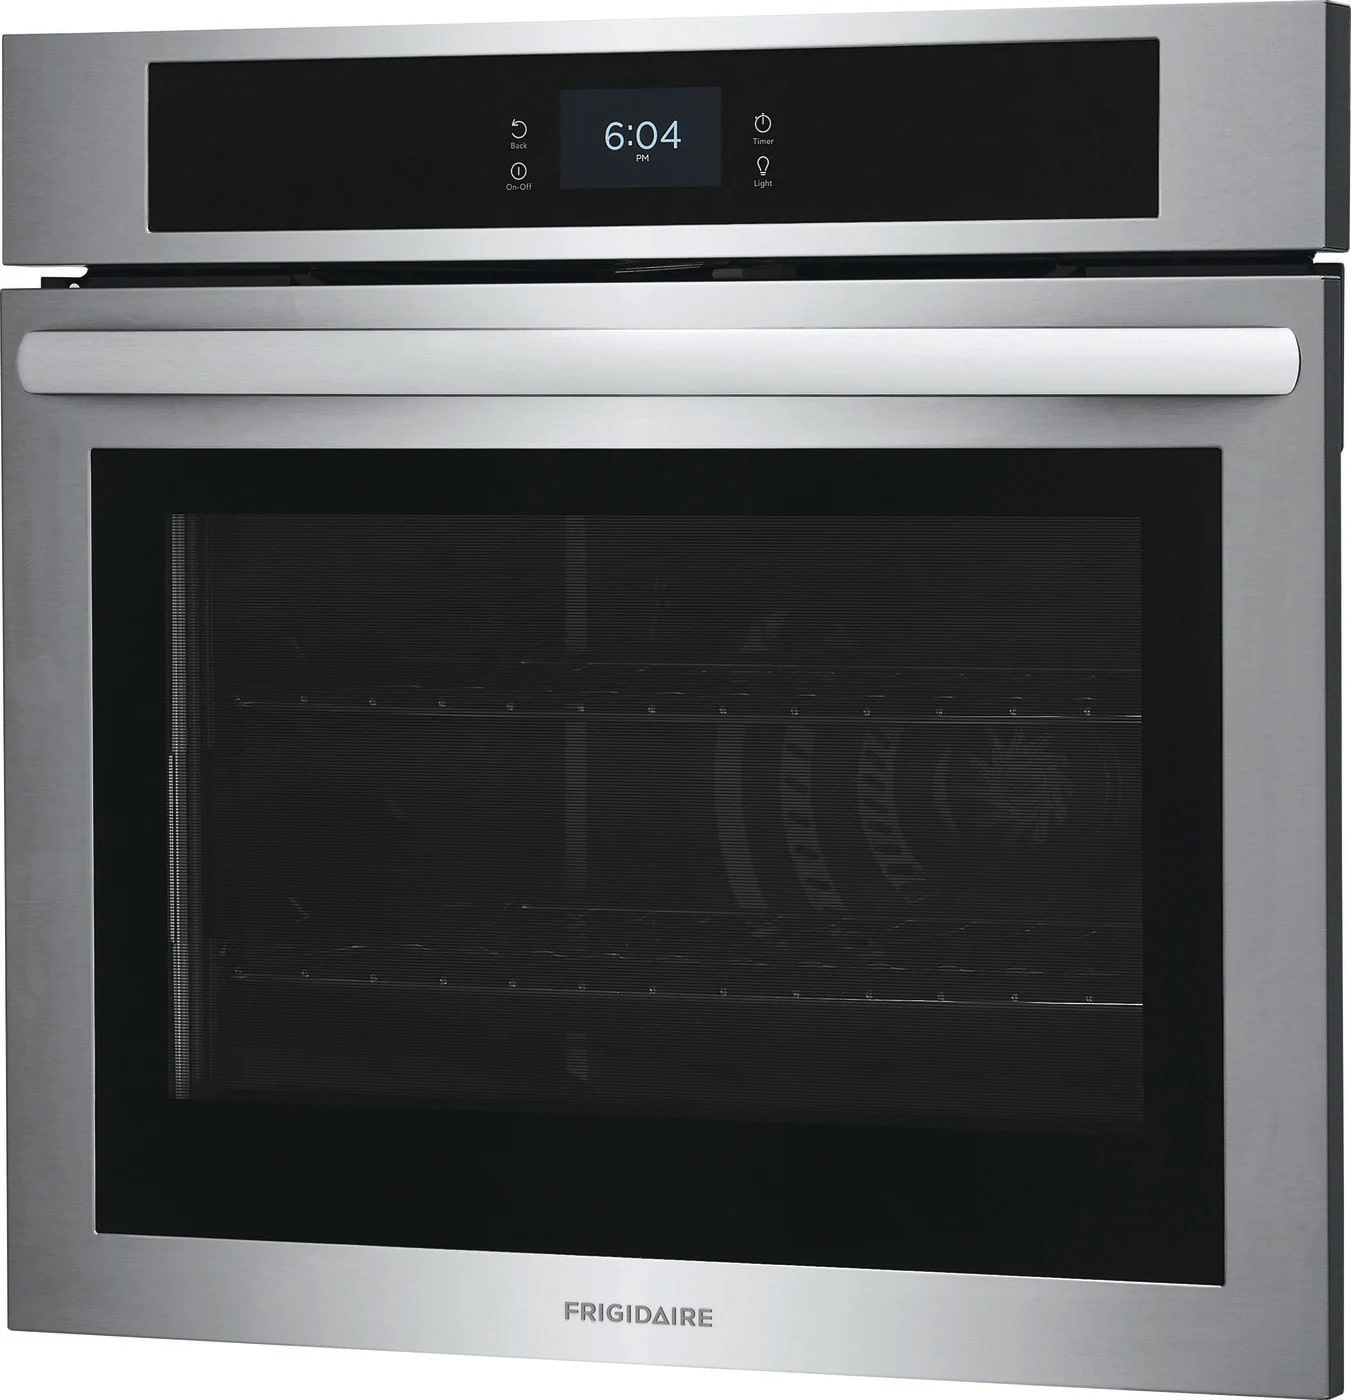 Frigidaire - 5.3 cu. ft Single Wall Oven in Stainless - FCWS3027AS